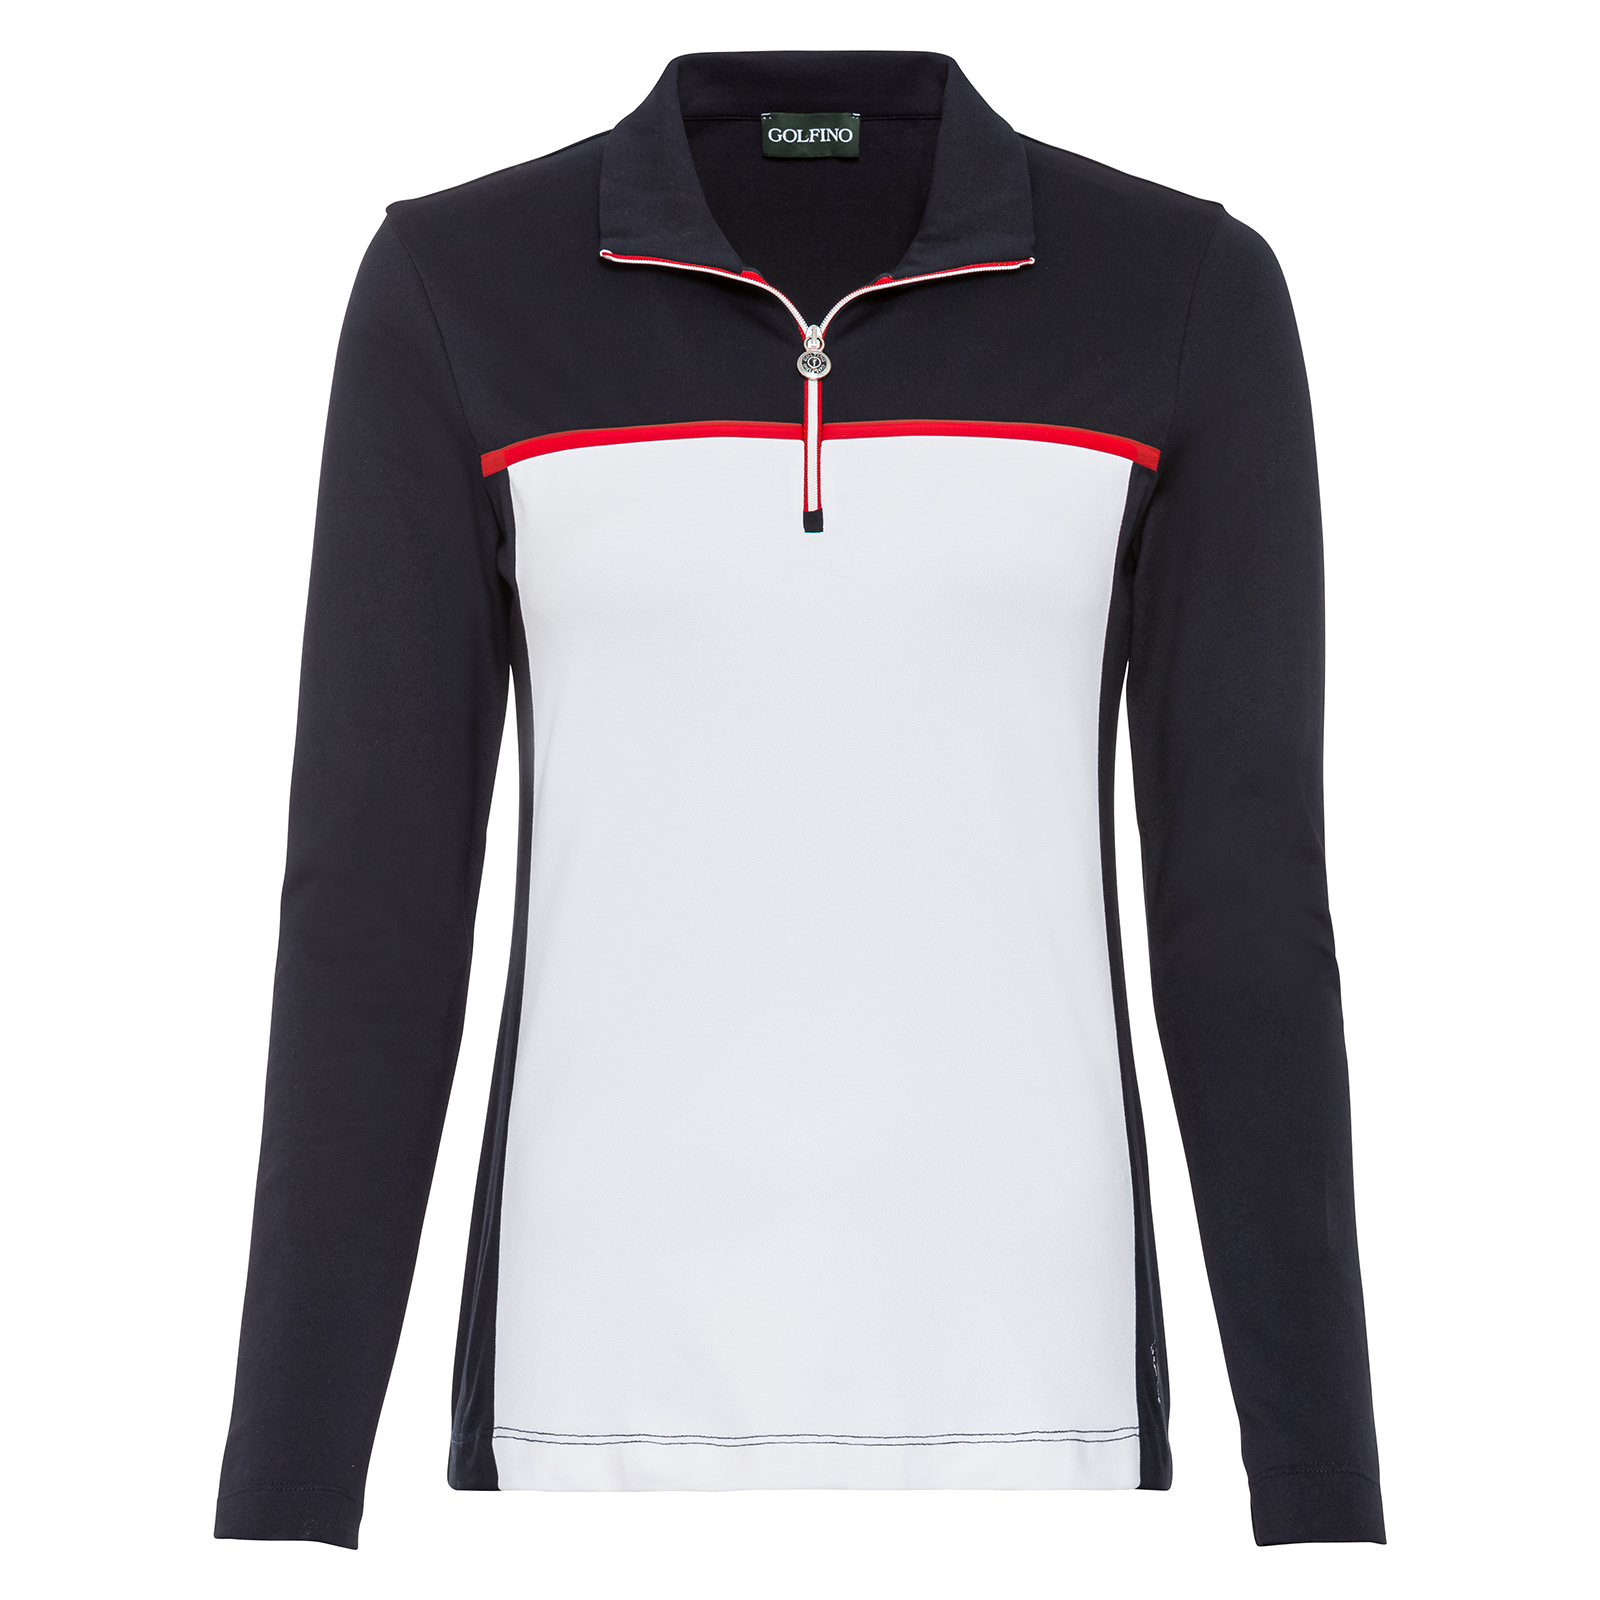 Ladies' midlayer golf troyer with UV protection